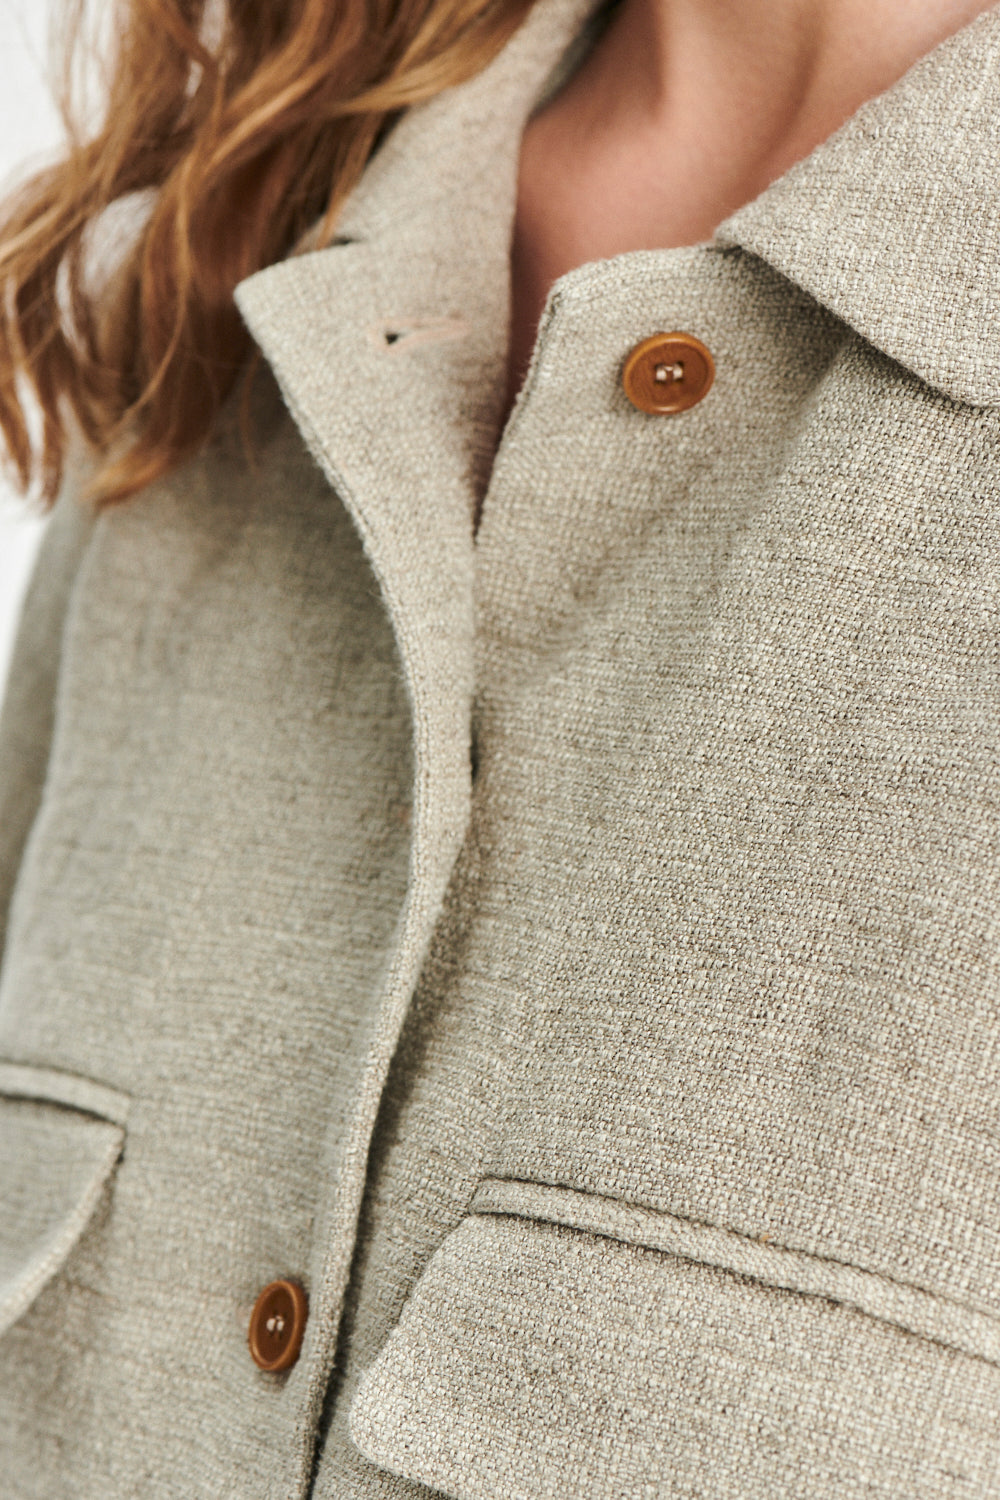 Cropped Jacket in a Beige Fluid and Structured Italian Linen Crepe